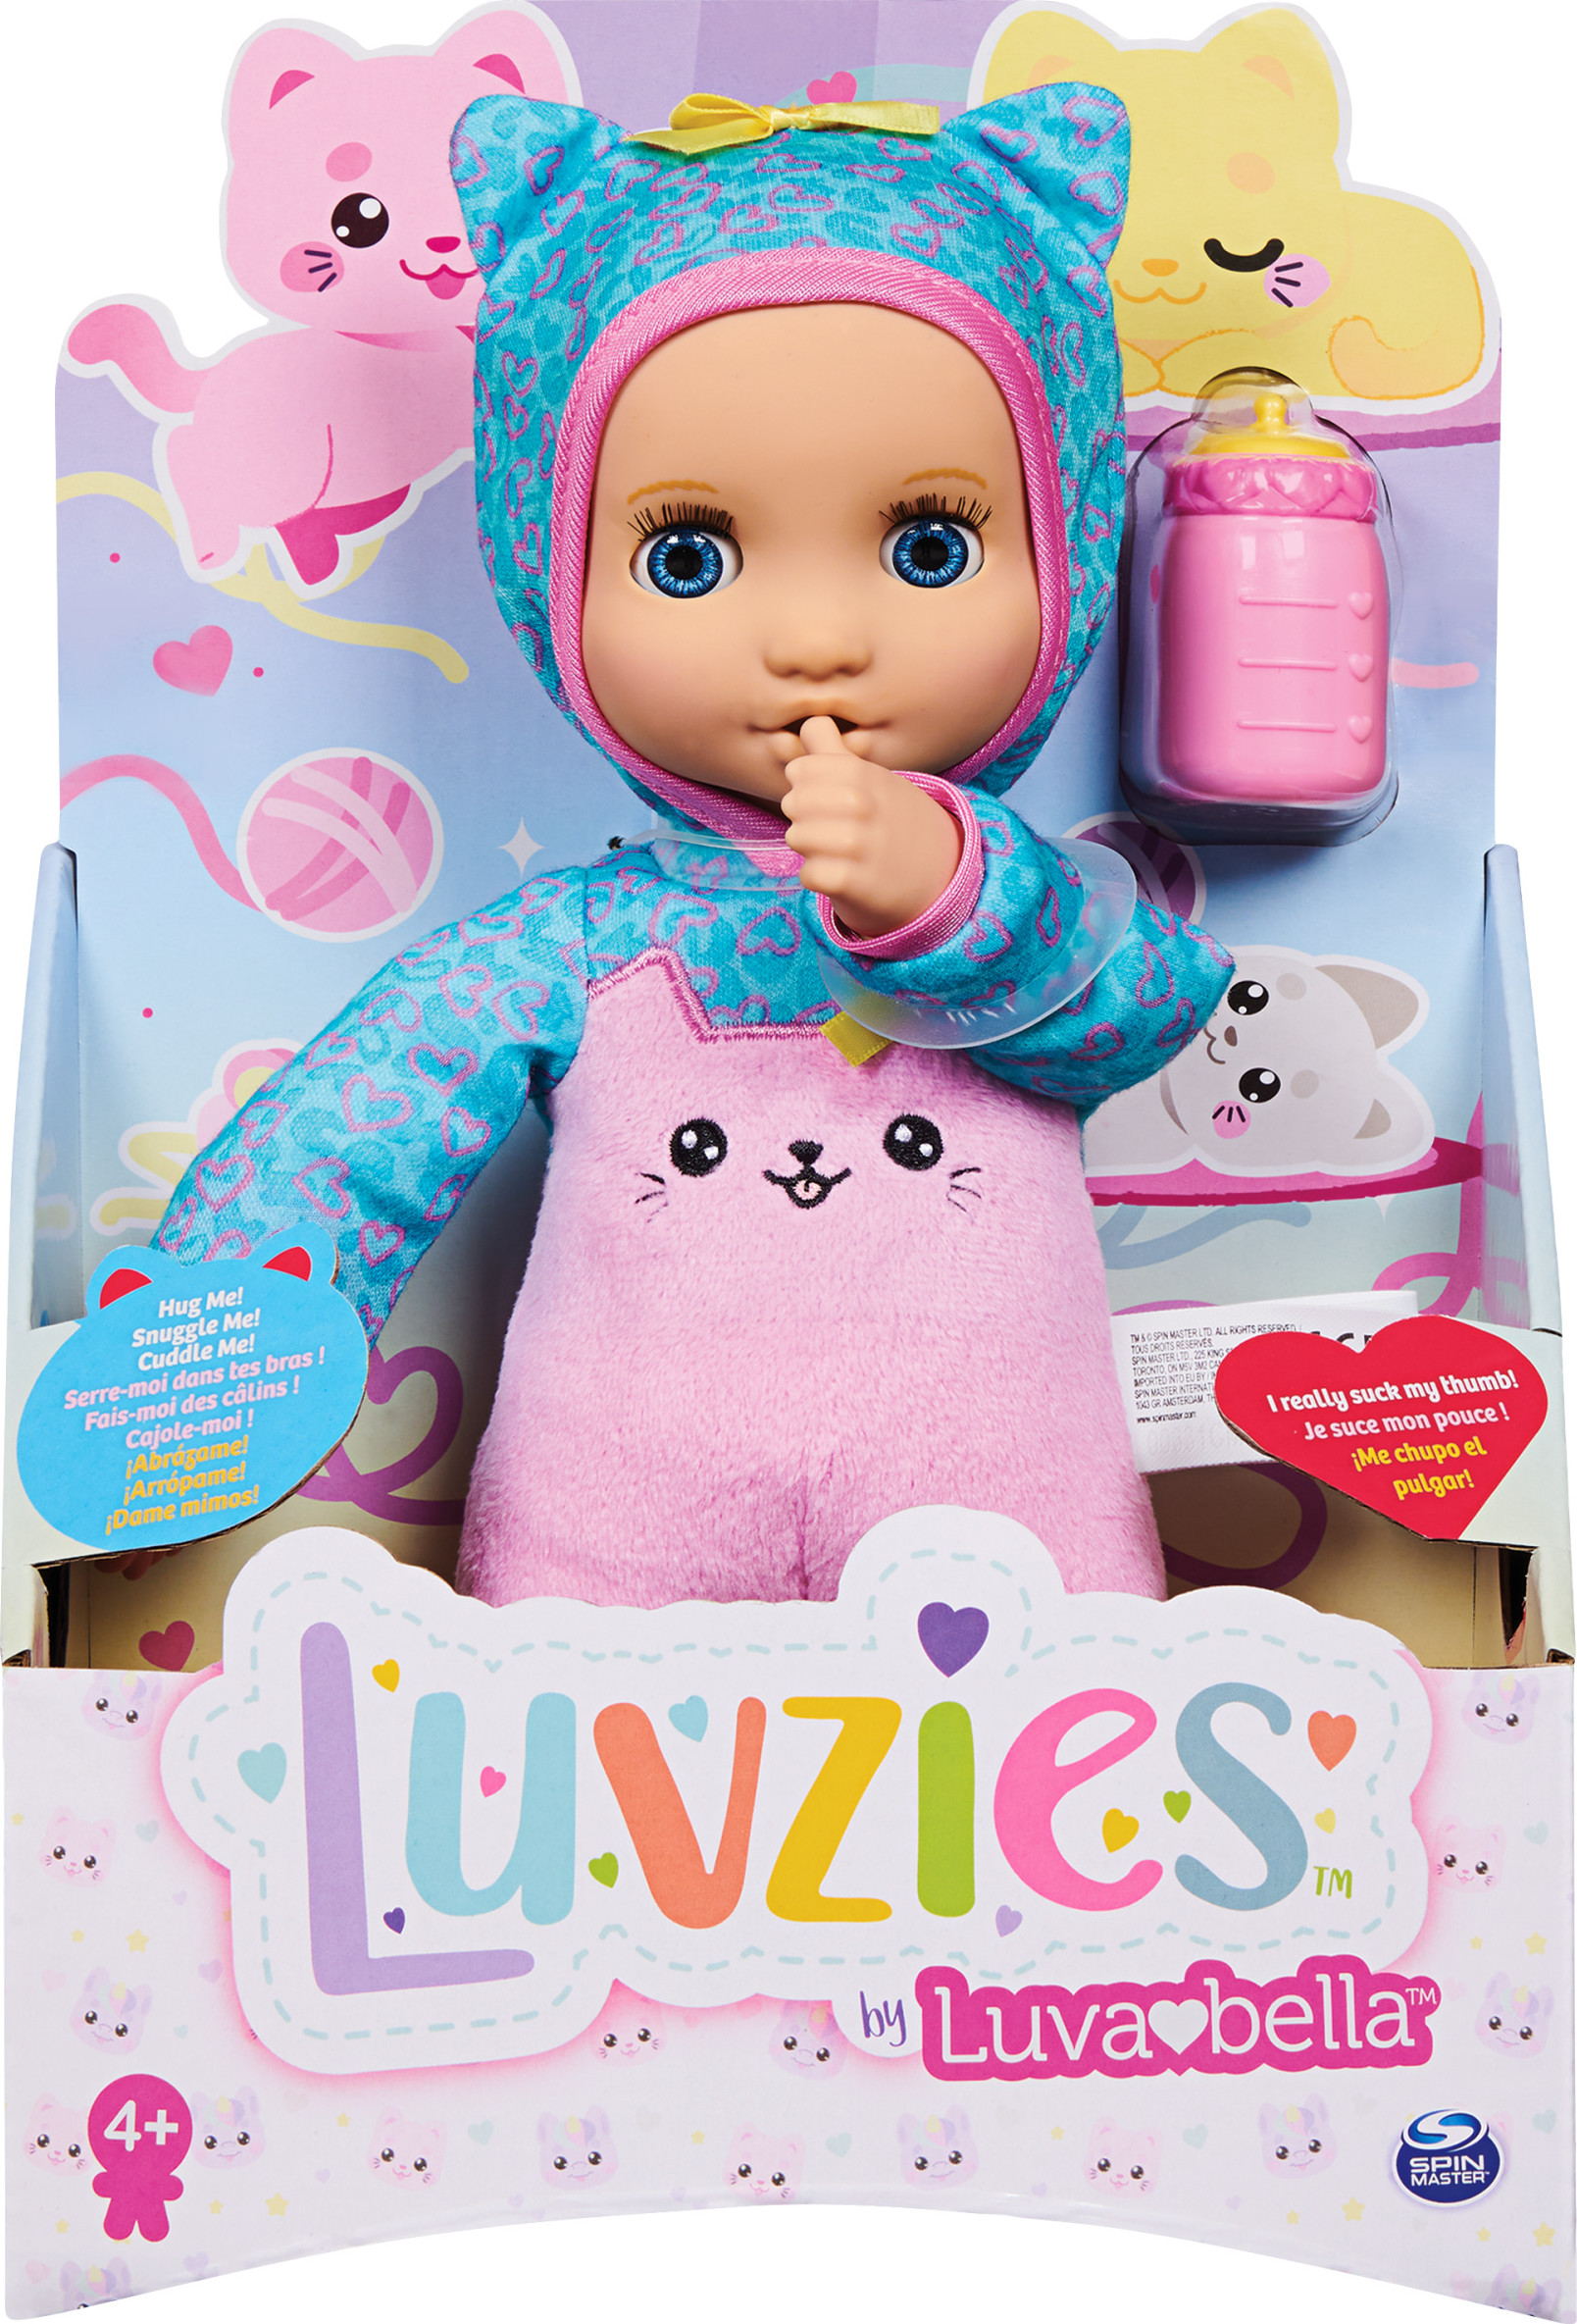 Luvzies by Luvabella, Kitten Onesie 11-inch Cuddly Baby Doll with Bottle Accessory, for Kids Aged 4 and up - image 2 of 5